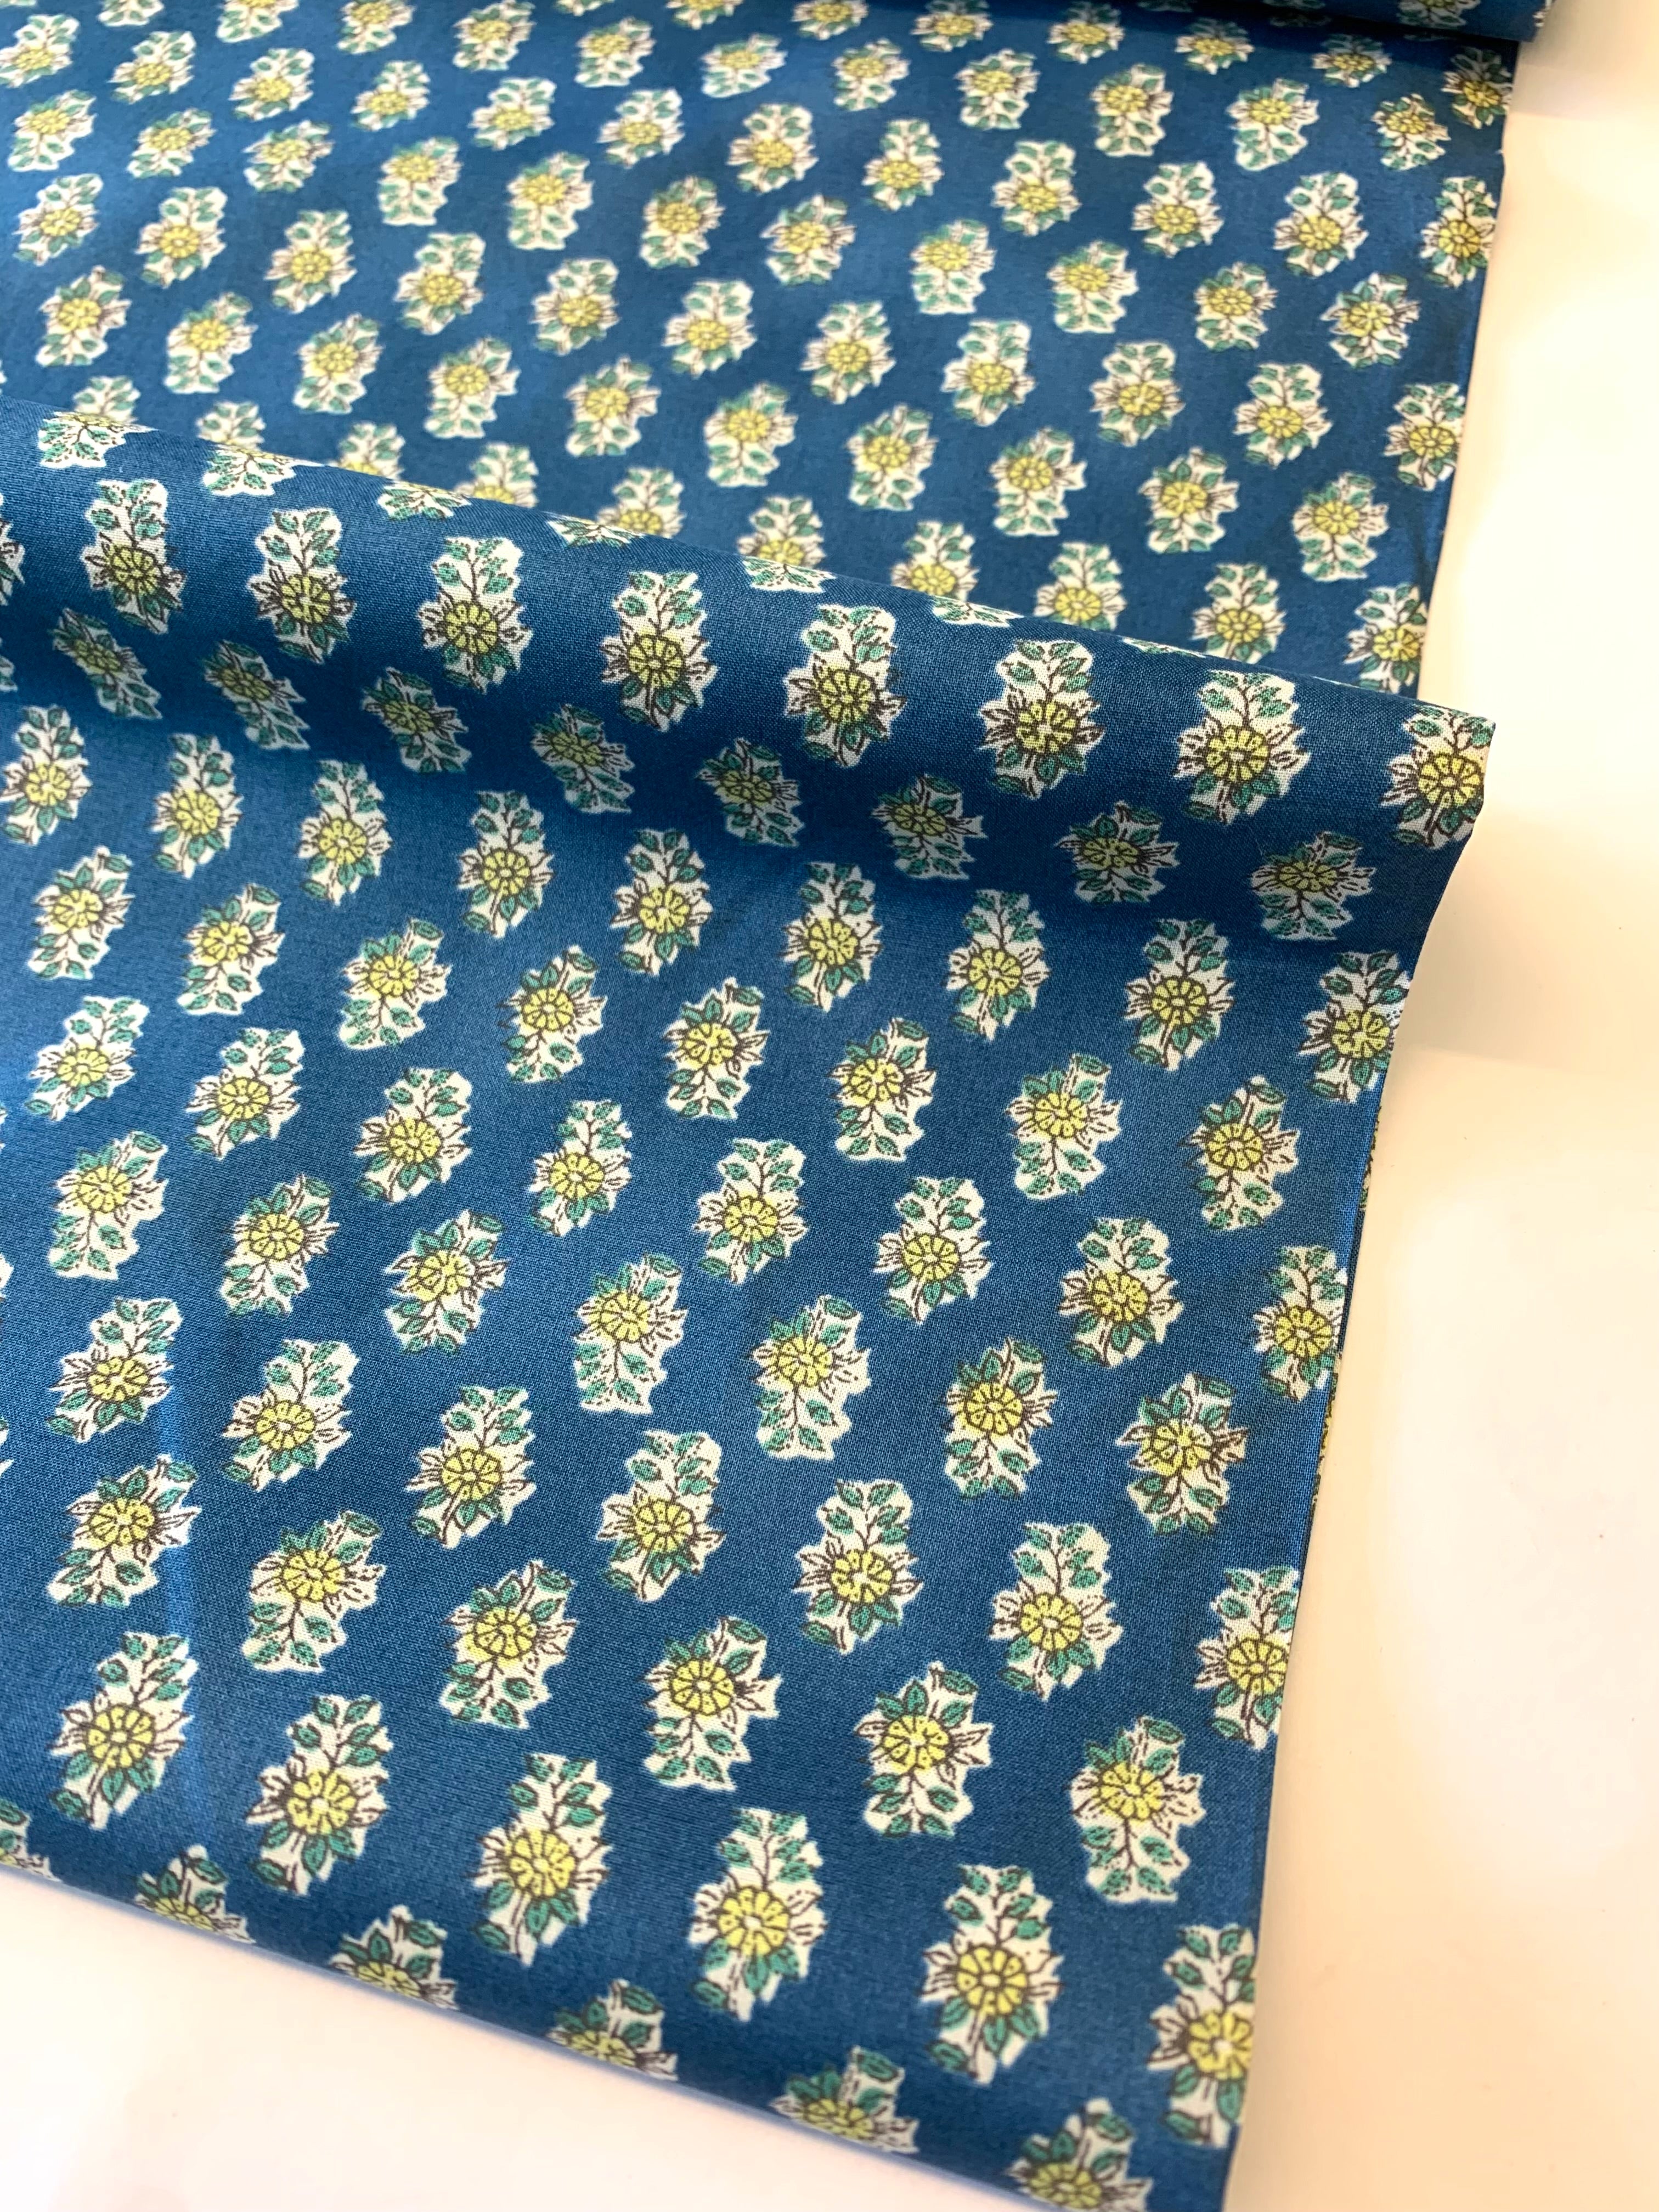 Kokka Japanese Cotton/ Ditsy Cottage Floral in Blue